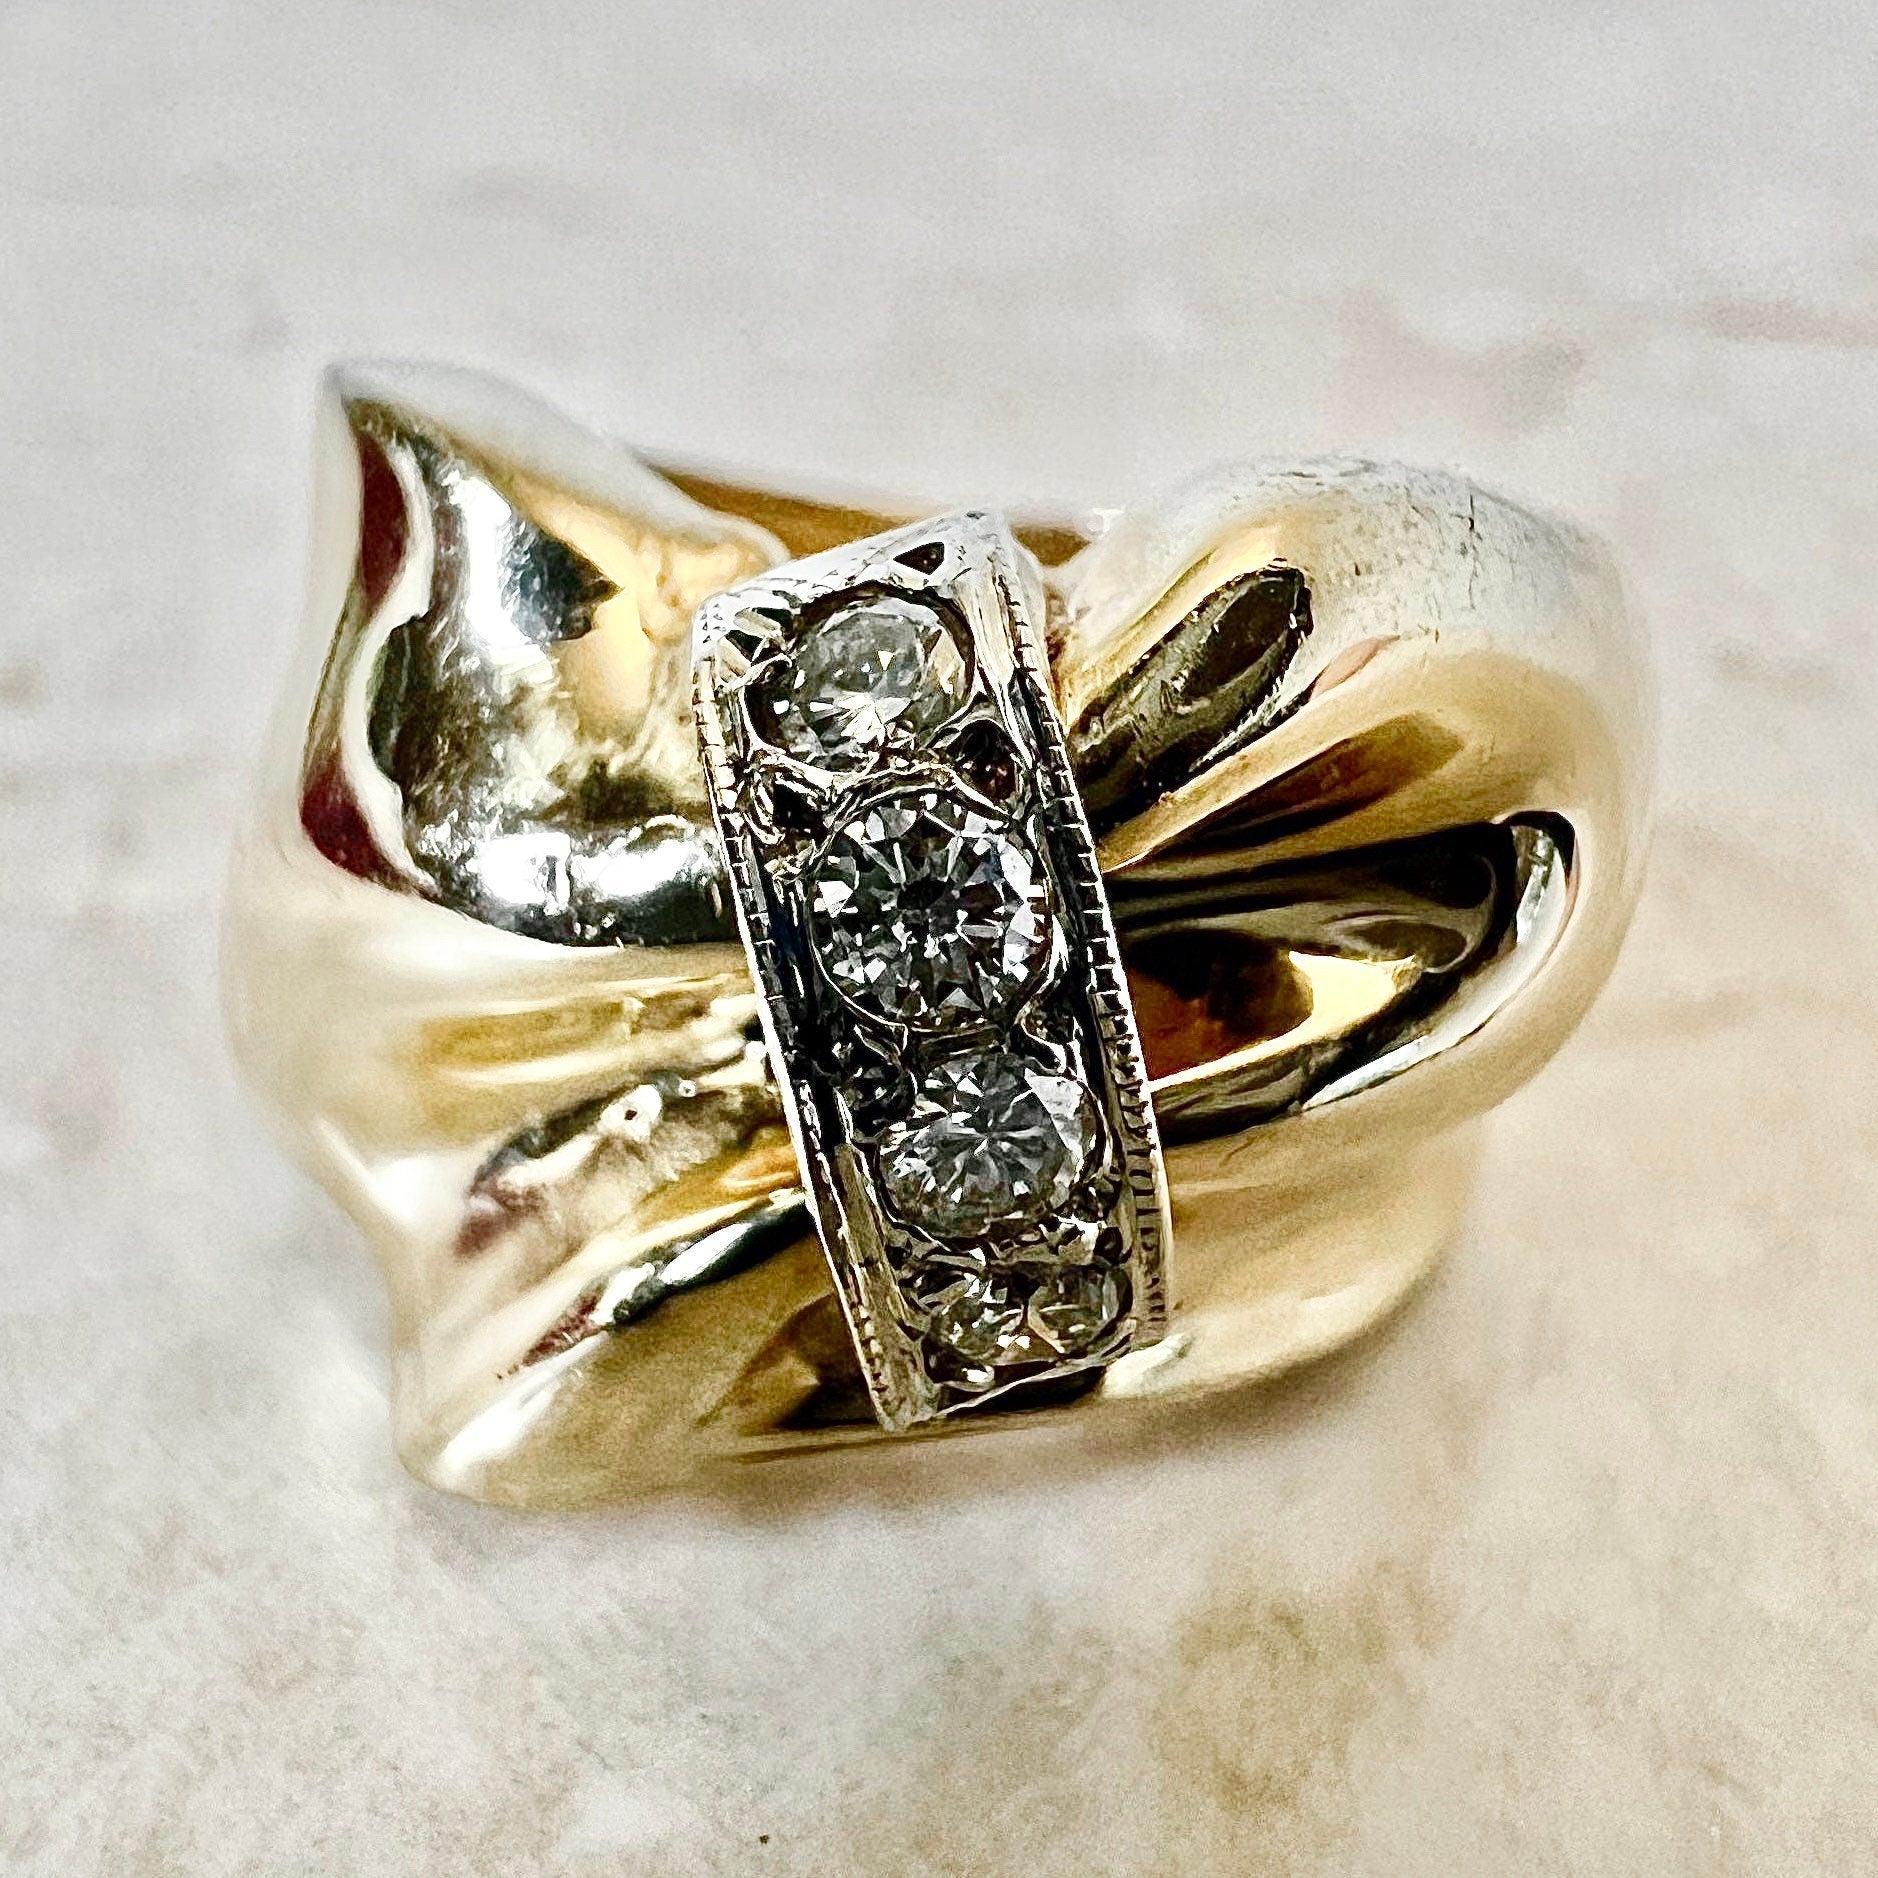 Timeless 1940s Solitaire Engagement Ring of the Week